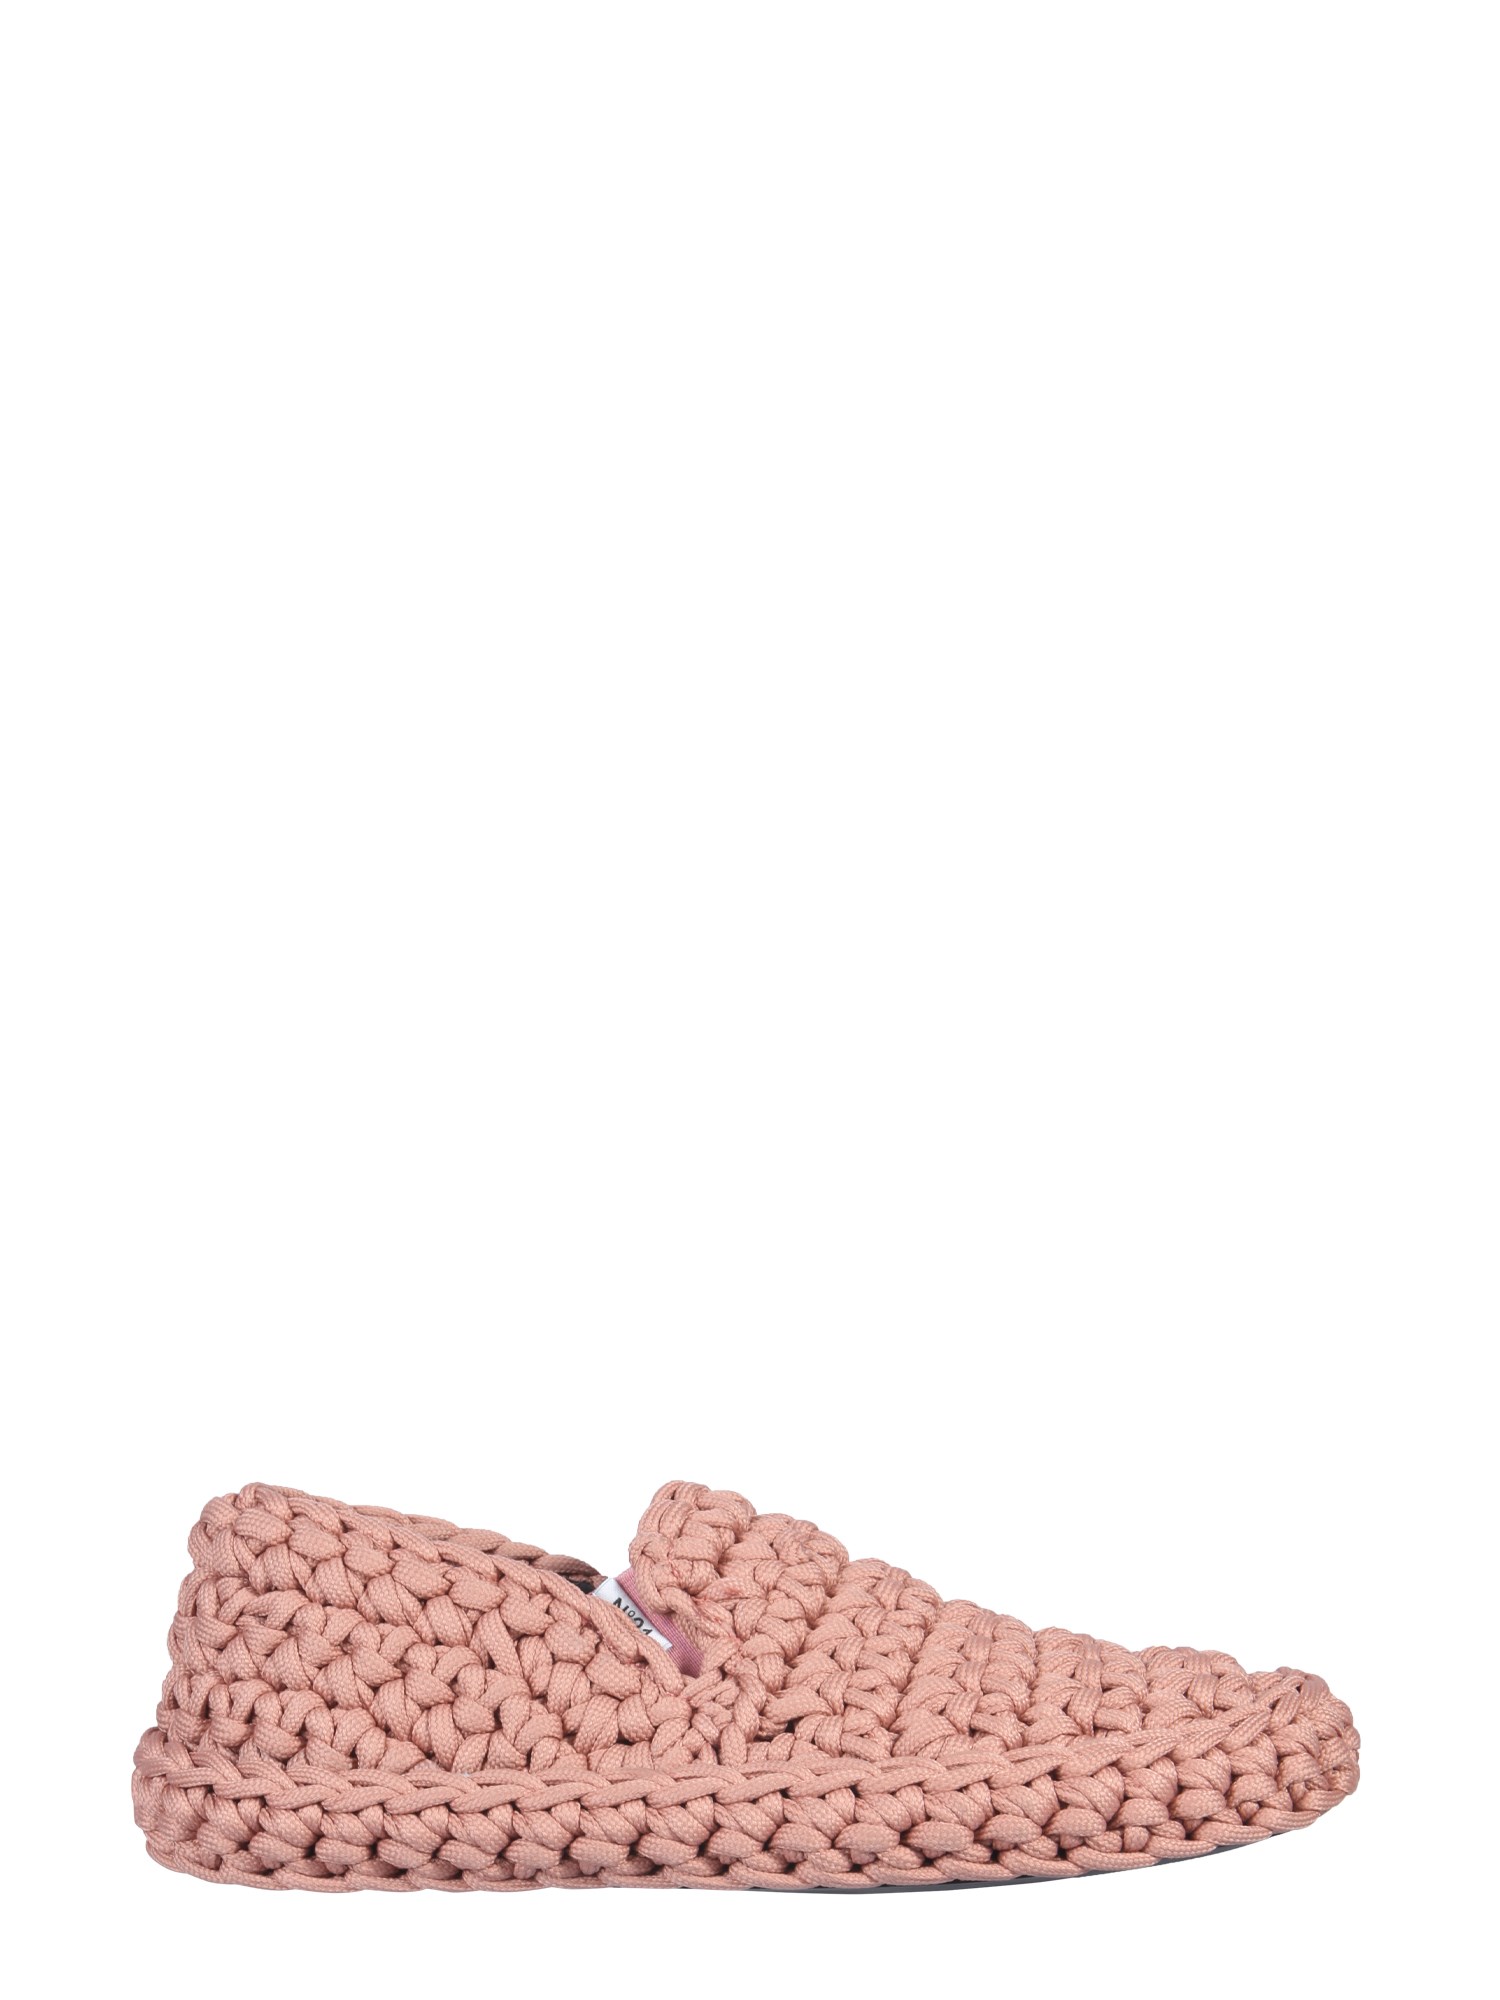 N°21 Womens Pink Other Materials Sandals